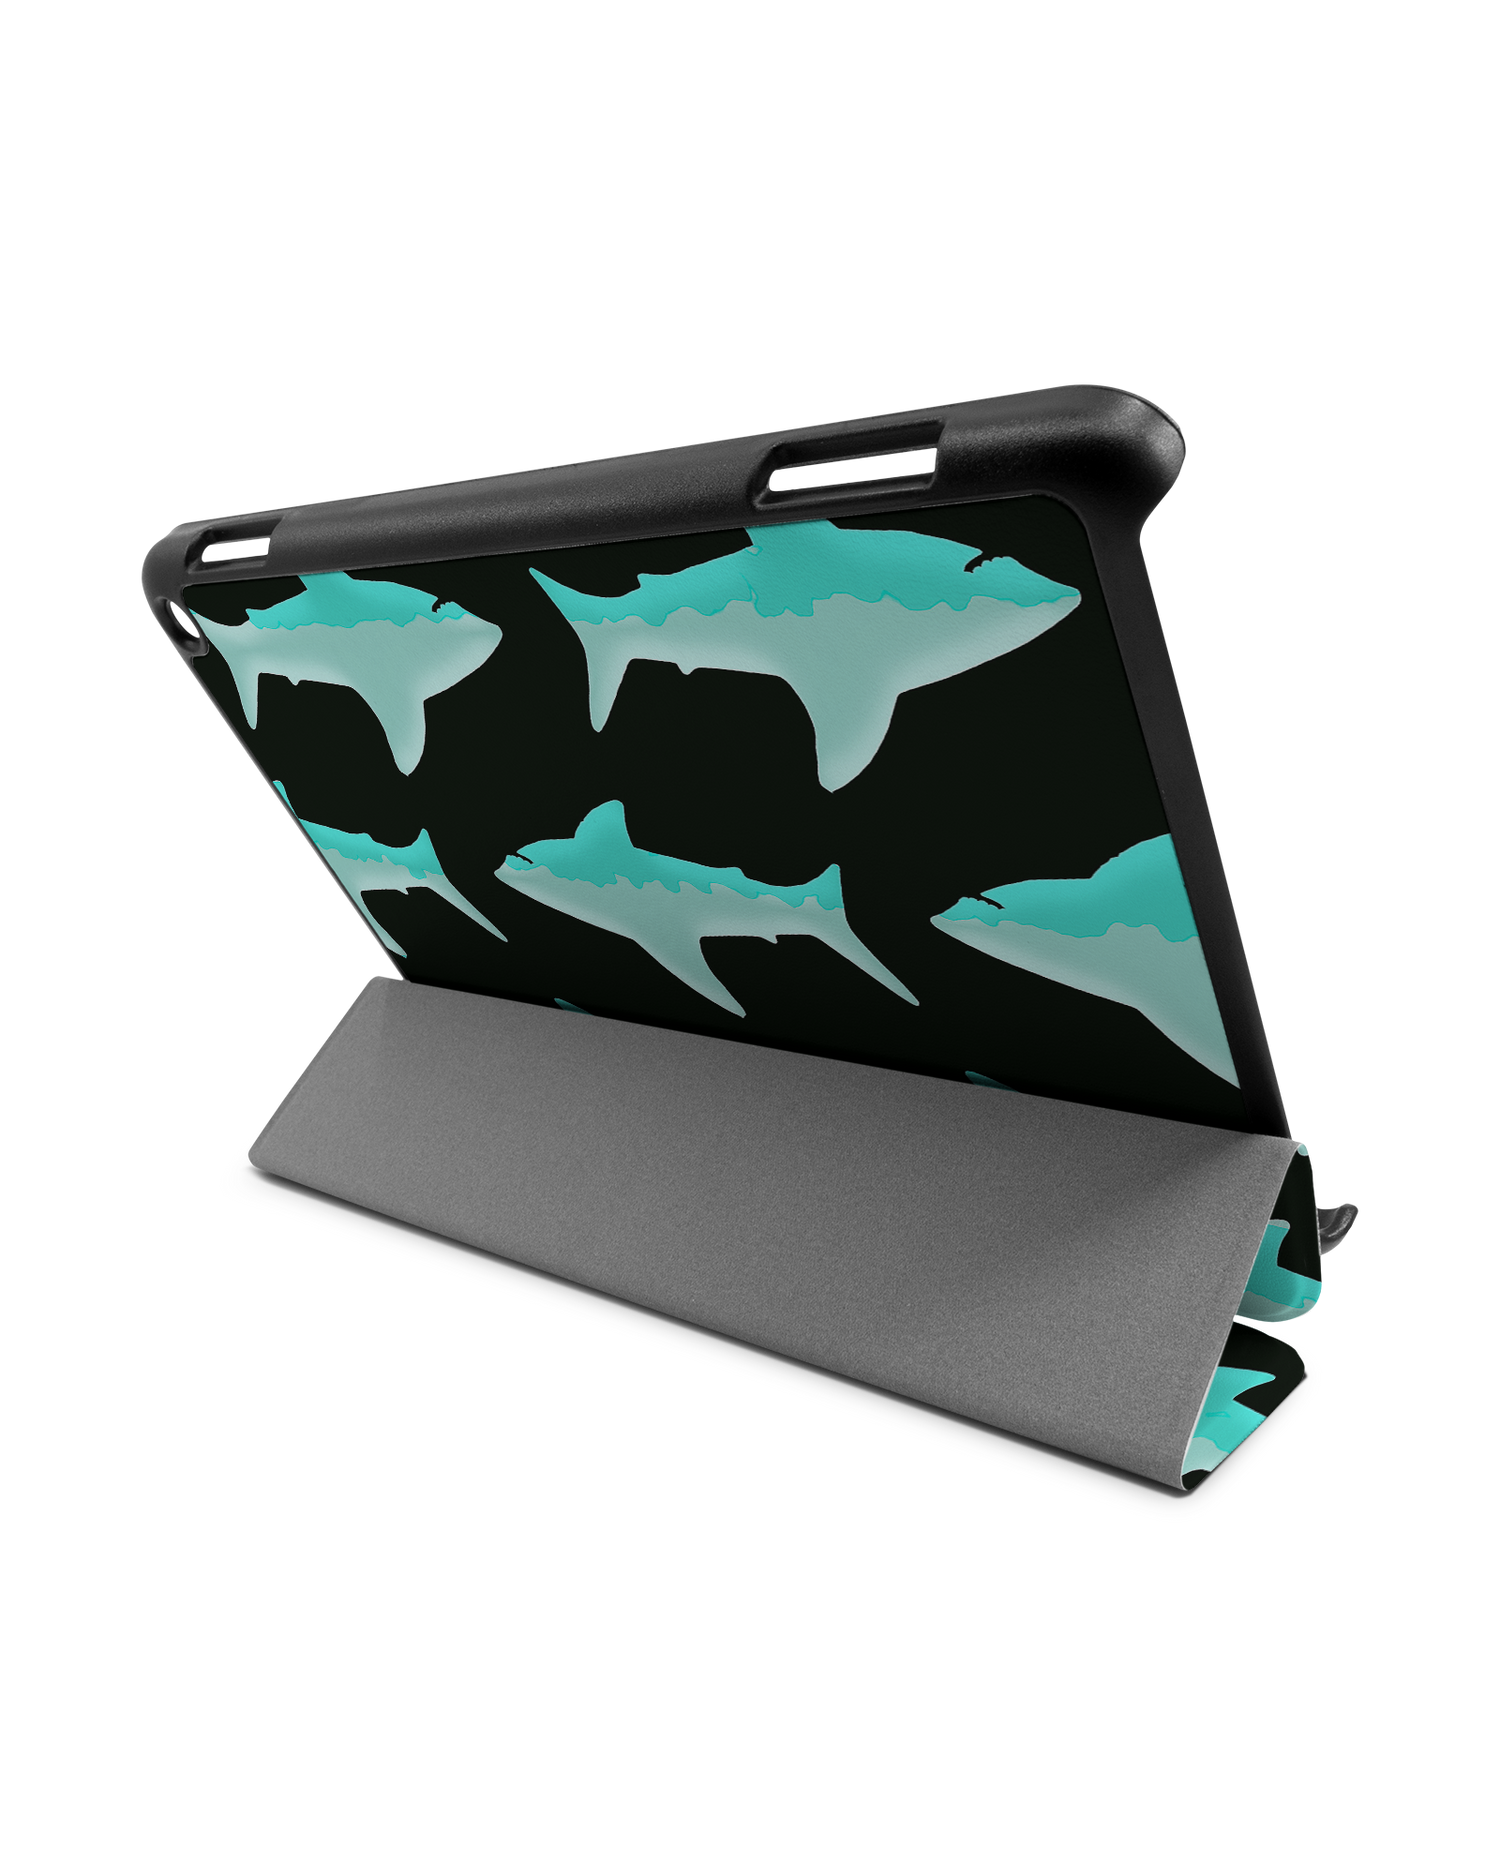 Neon Sharks Tablet Smart Case for Amazon Fire HD 8 (2022), Amazon Fire HD 8 Plus (2022), Amazon Fire HD 8 (2020), Amazon Fire HD 8 Plus (2020): Used as Stand